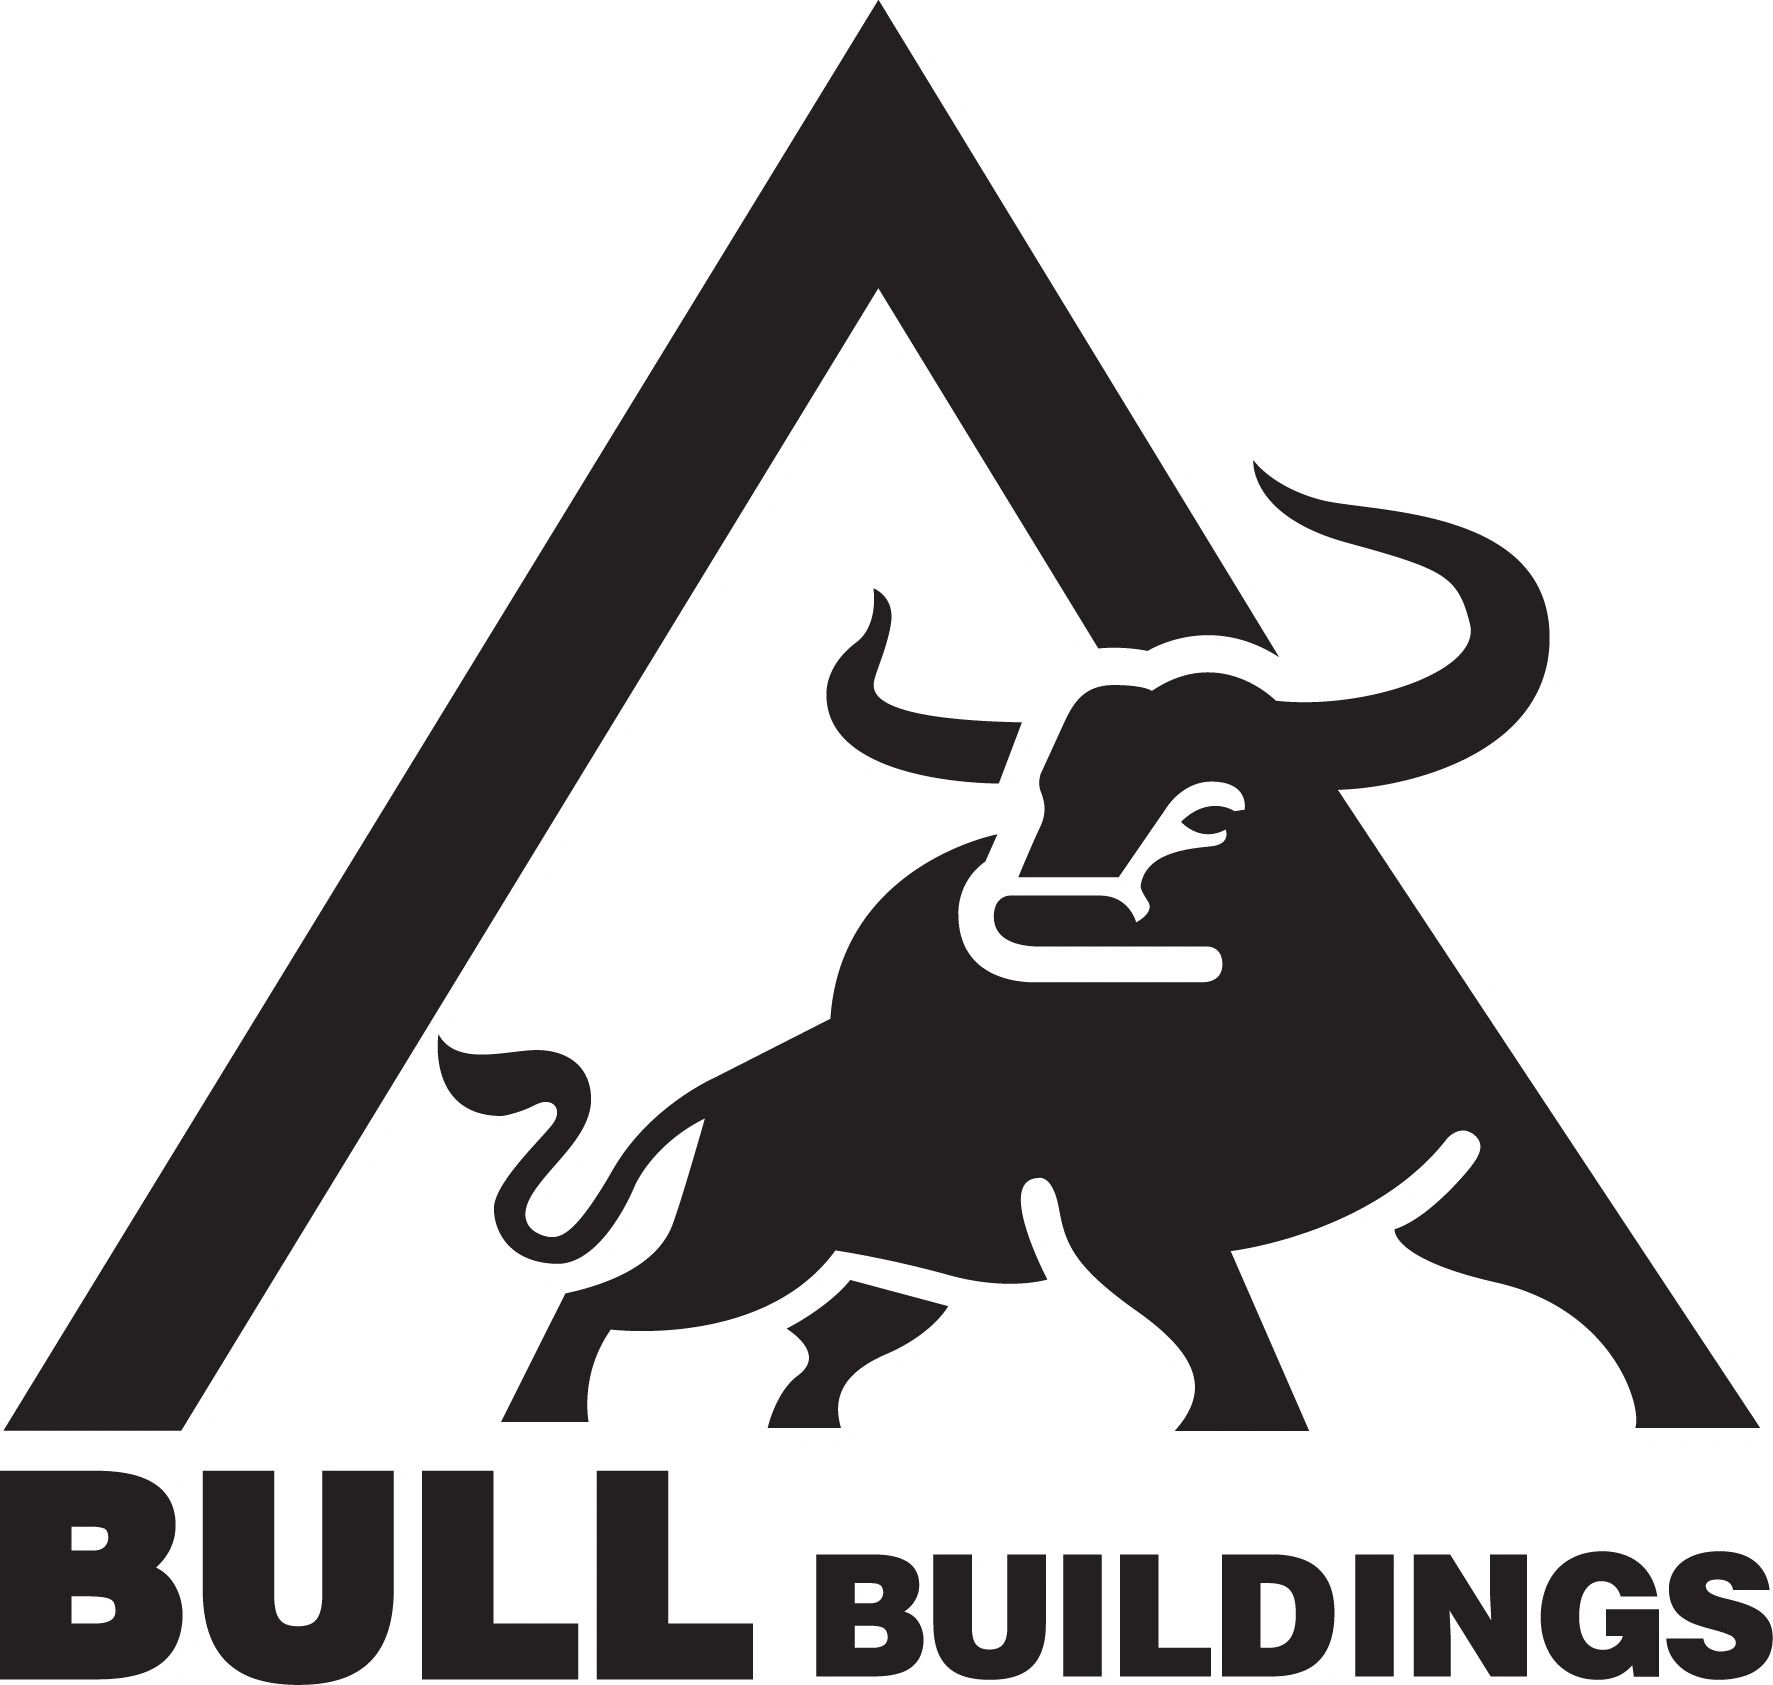 Bull Building sheds